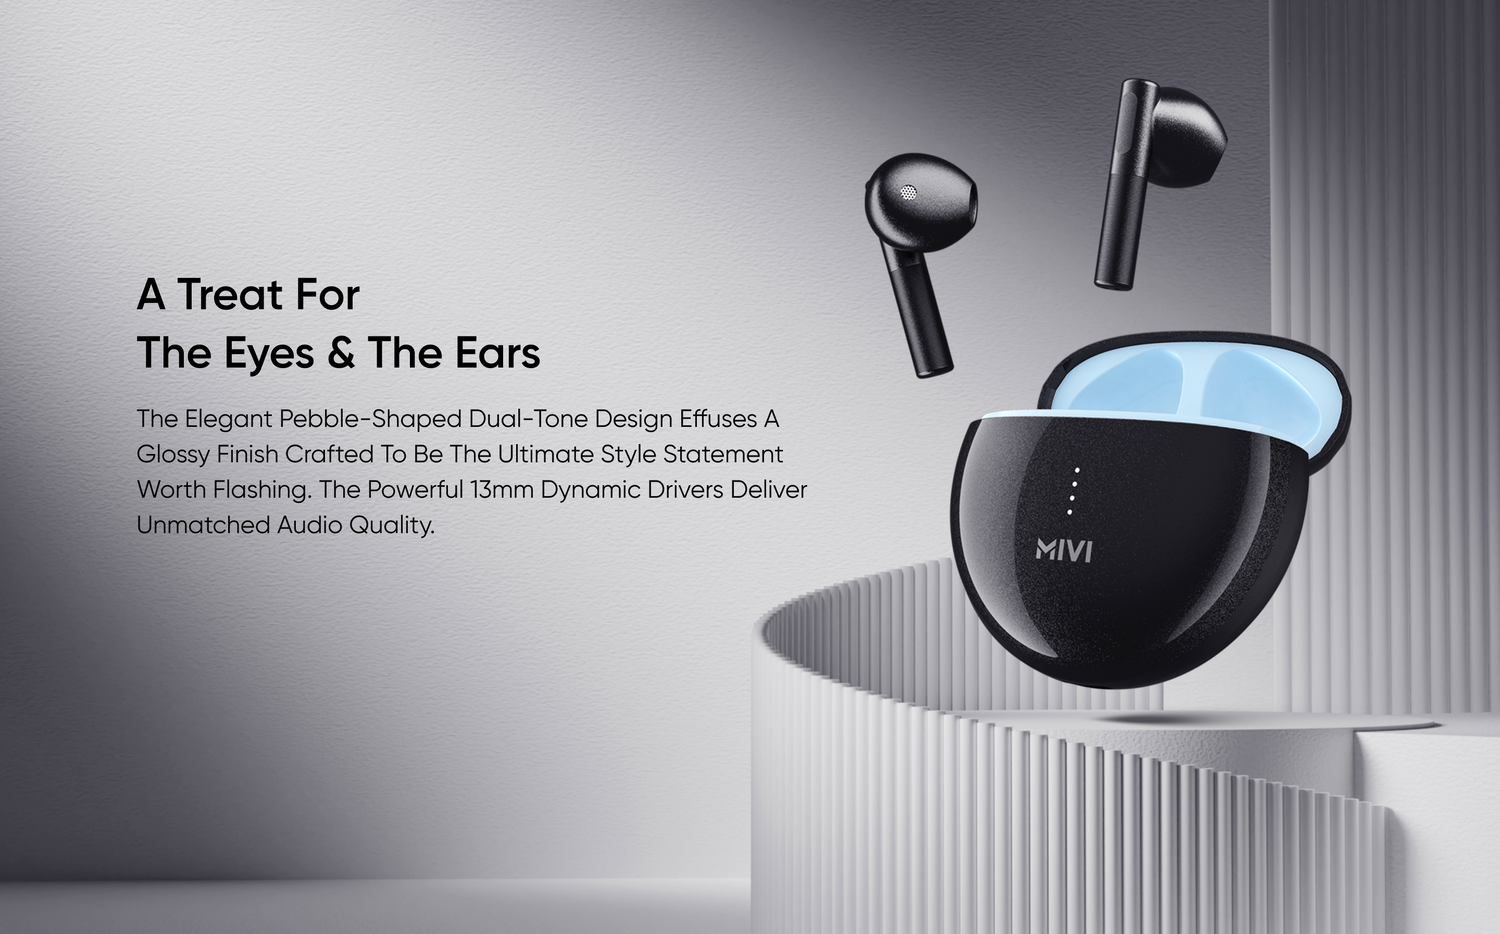 A Treat for the Eyes & the Ears - The elegant pebble-shaped dual-tone design effuses a glossy finish crafted to be the ultimate style statement worth flashing. The powerful 13mm dynamic drivers deliver unmatched audio quality.